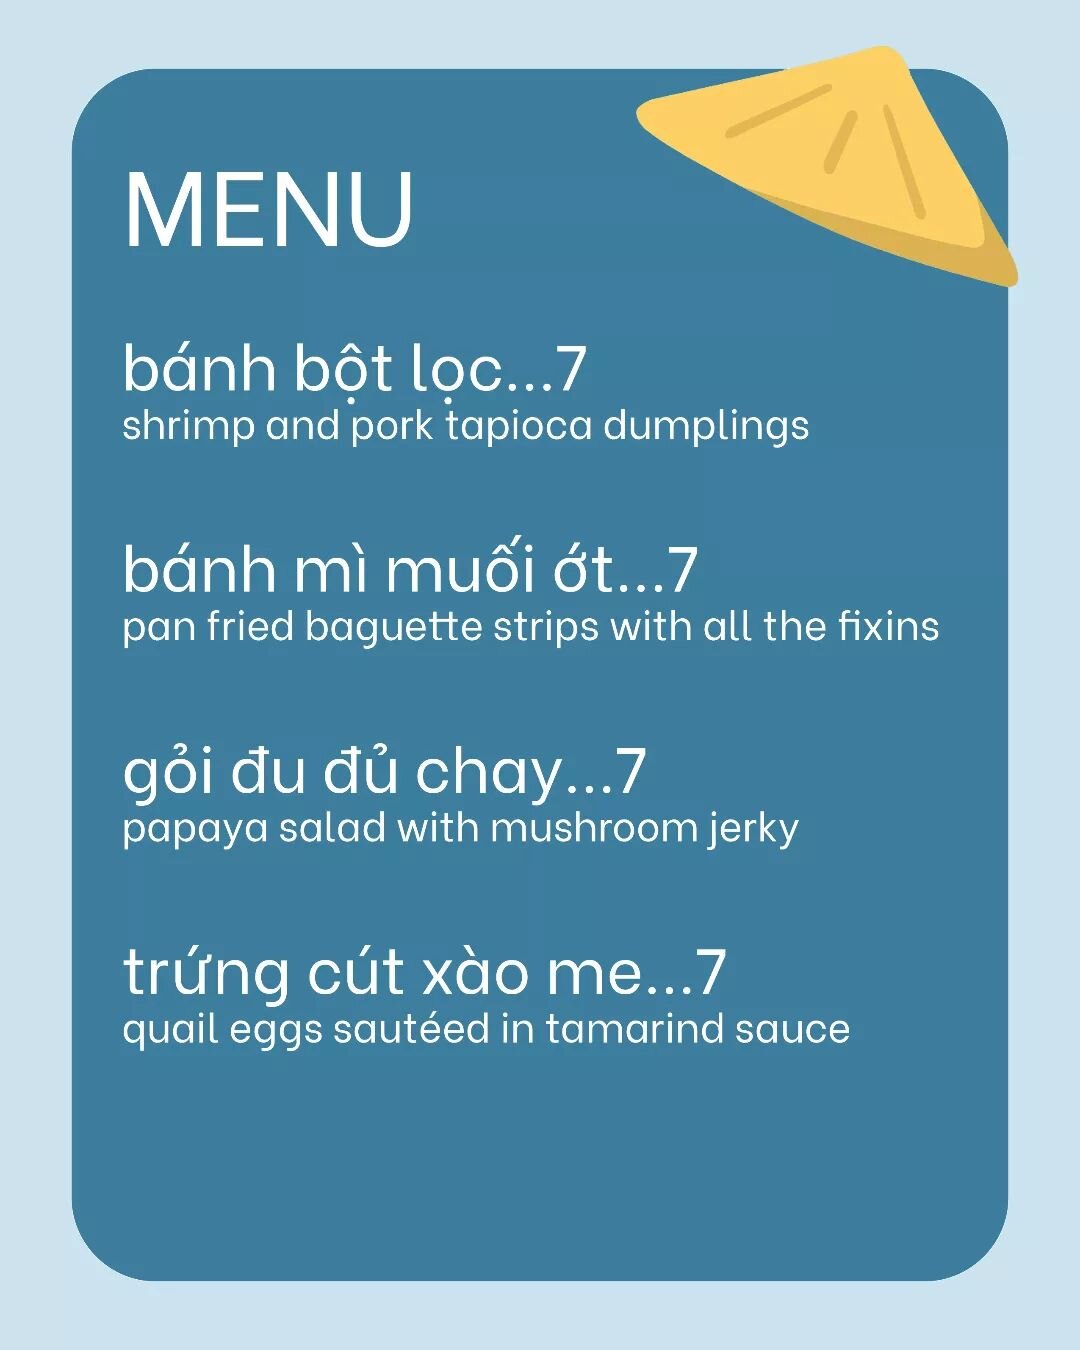 Our little menu for this weekend's pop-up @sonofabeandanforth!

We'll be cranking out delicious drinks and munchies both Sat-Sun from 12pm-8pm.

@tam.restaurant will be opened regularly in the Junction as well but if you're in the Danforth area, defi